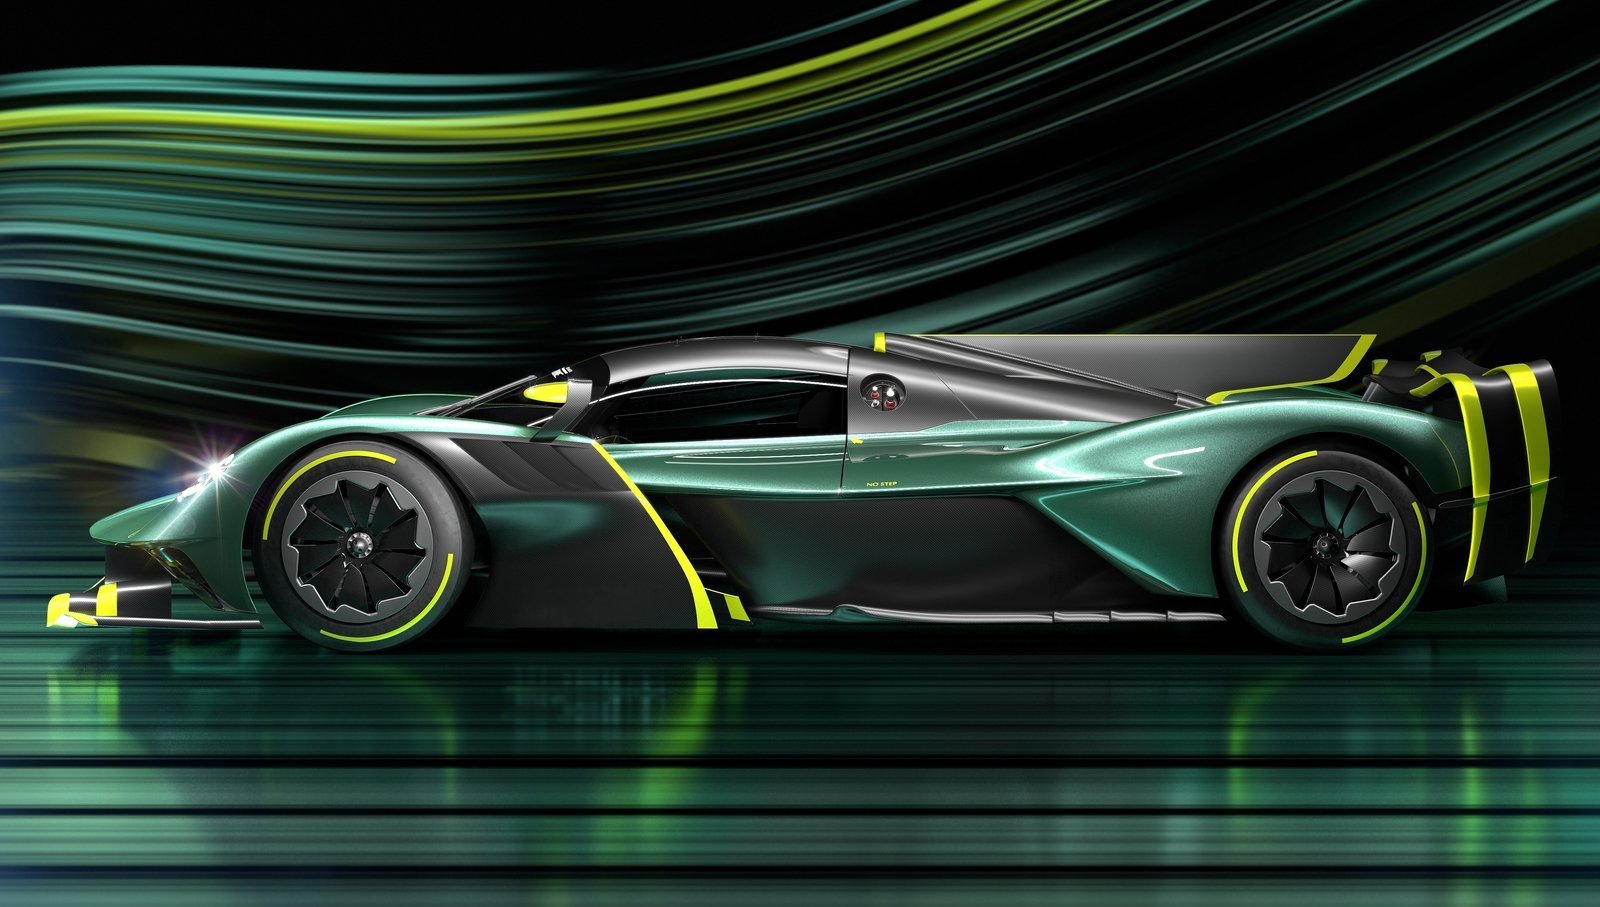 Aston Martin confirms insane track-only Valkyrie AMR Pro Models